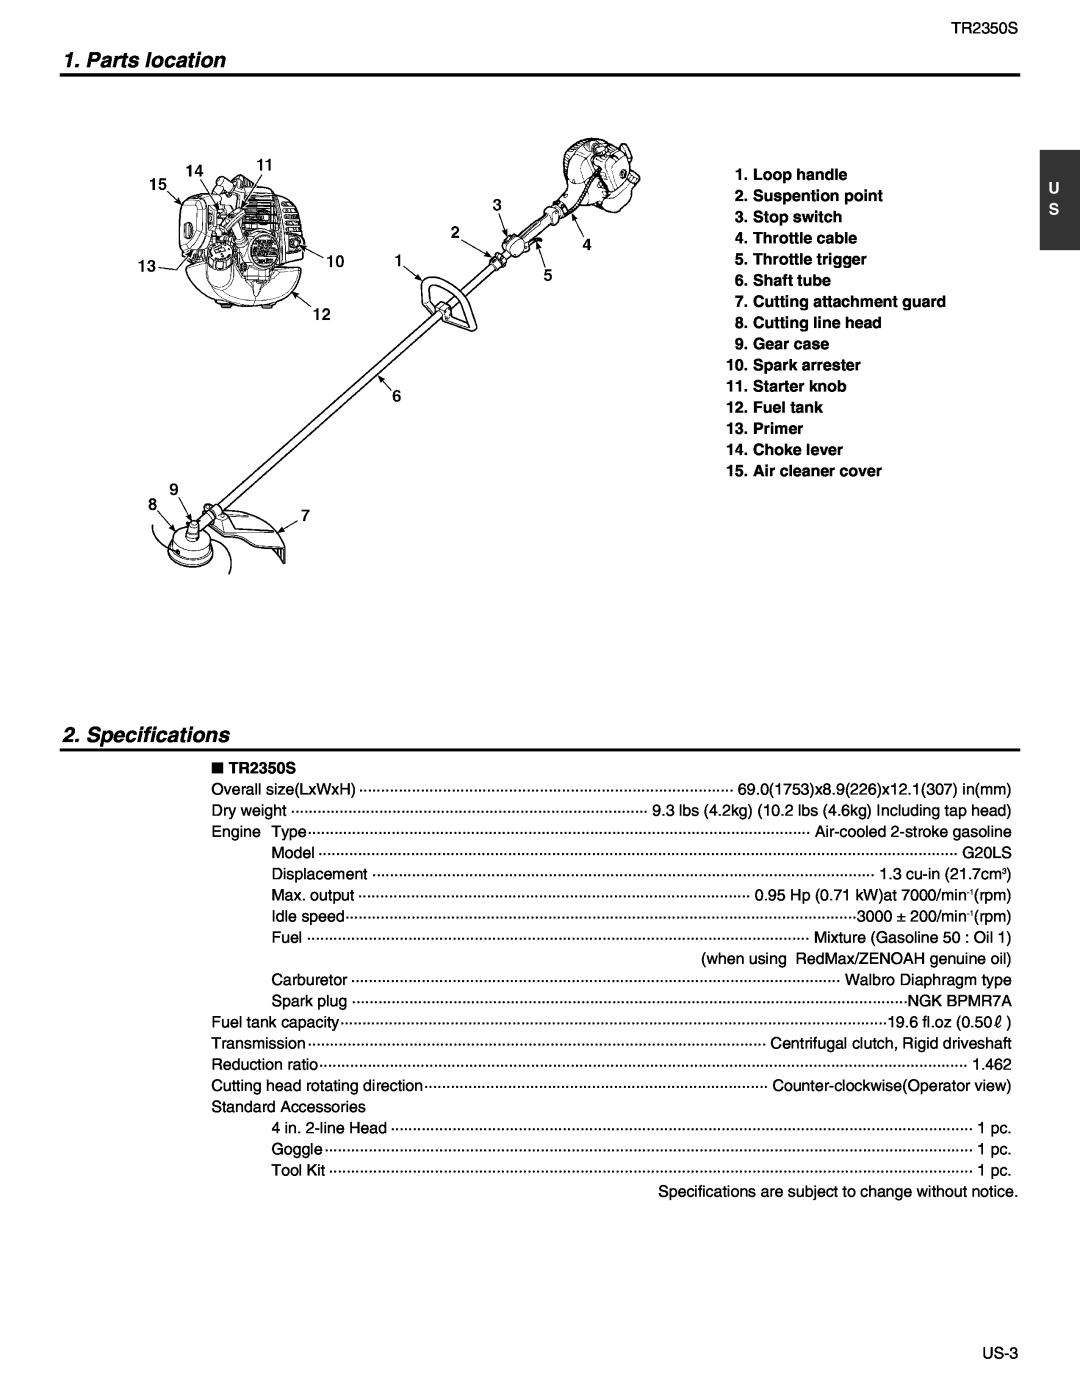 RedMax TR2350S manual Parts location, Specifications 